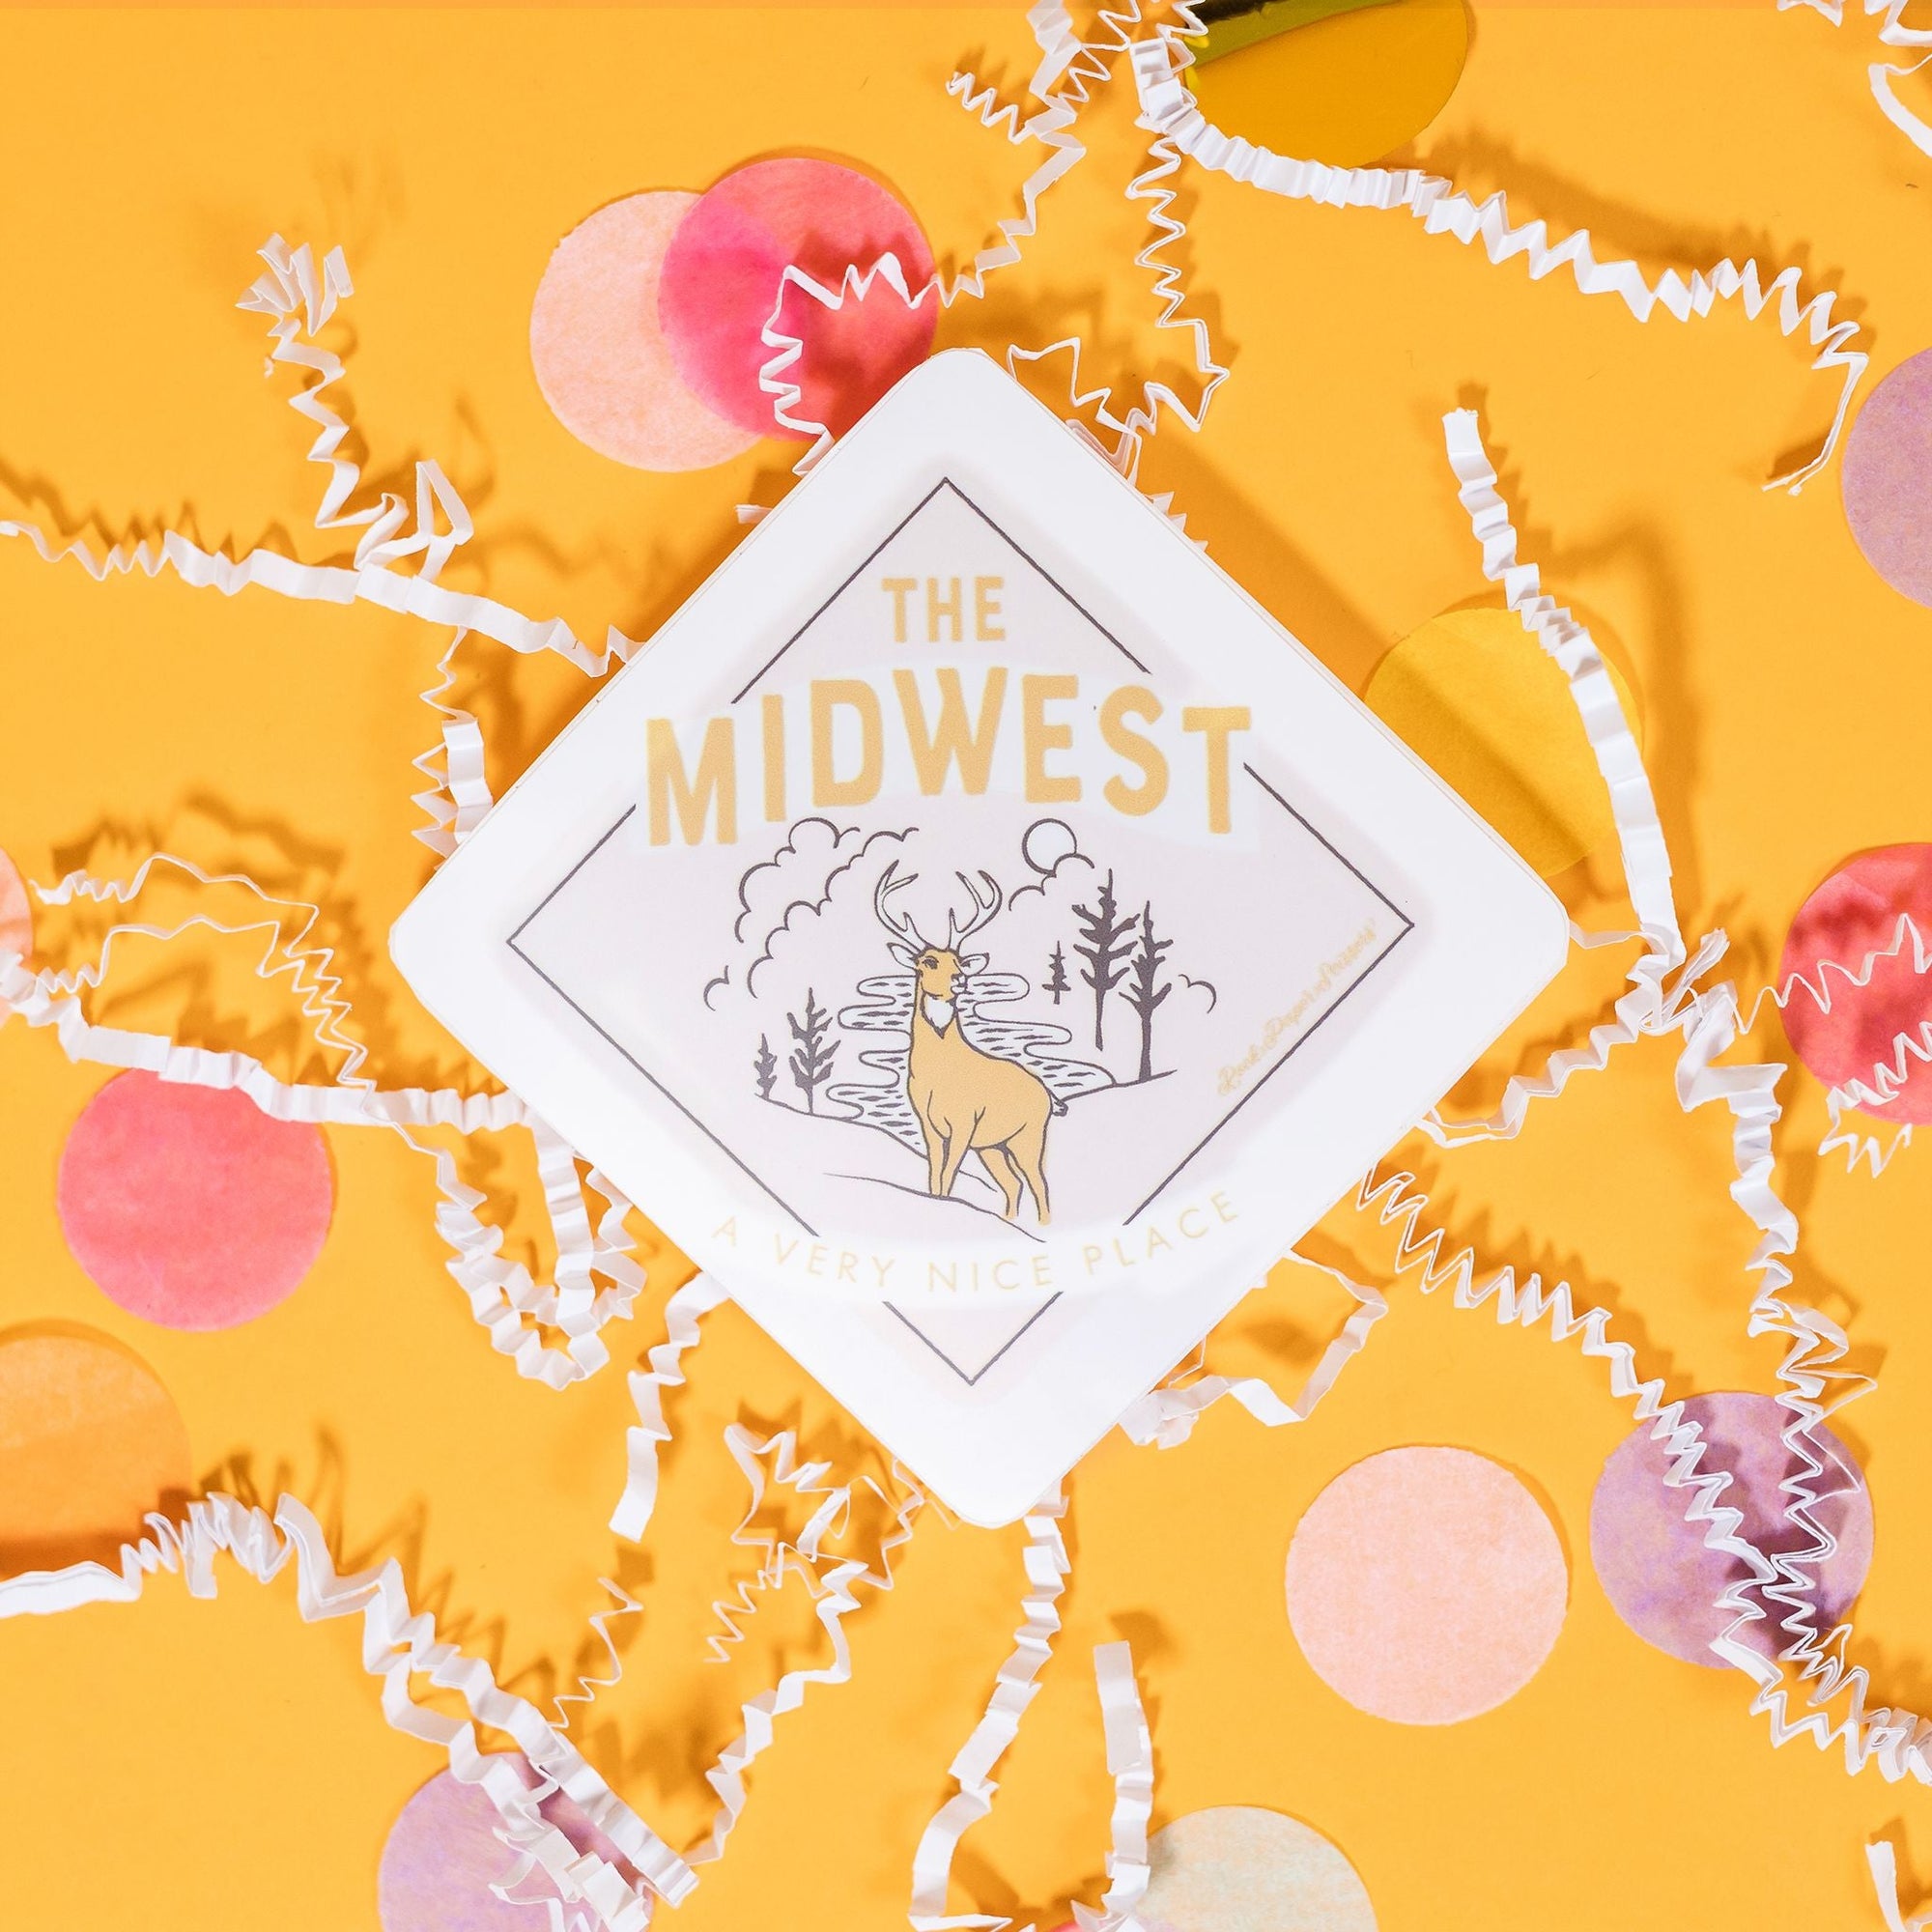 On a sunny mustard background sits a sticker with white crinkle and big, colorful confetti scattered around. This white, diamond sticker has an illustration of a stag deer with pine trees, clouds, sun, and river. It is in a light orange yellow with brown. It says "THE MIDWEST", "A Very Nice Place"" in light orange yellow block lettering. 2"-3"